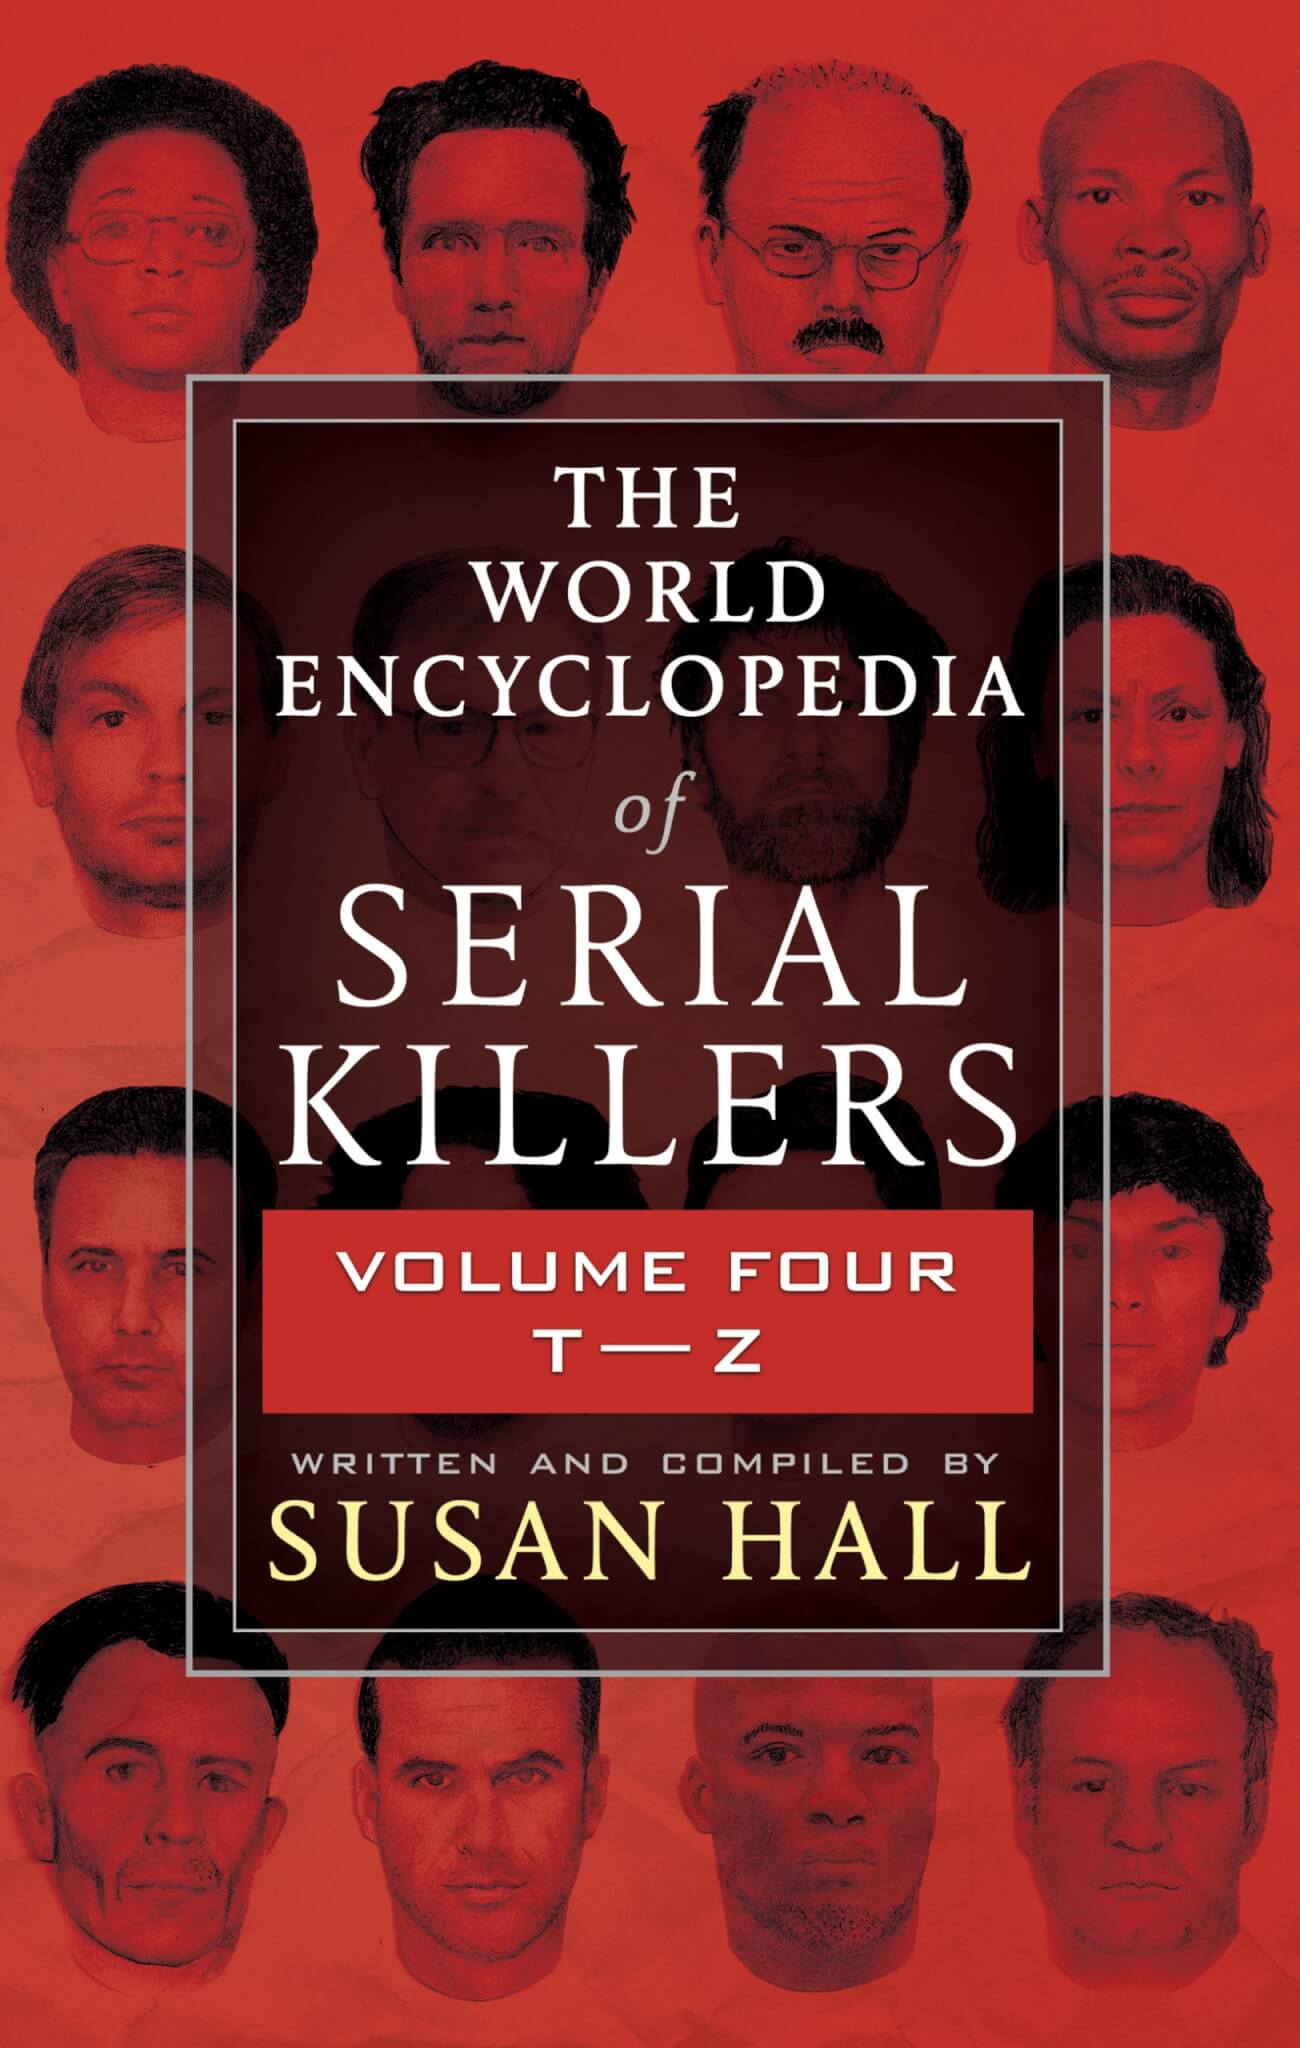 The World Encyclopedia Of Serial Killers Volume Four:  True Crime Books Available